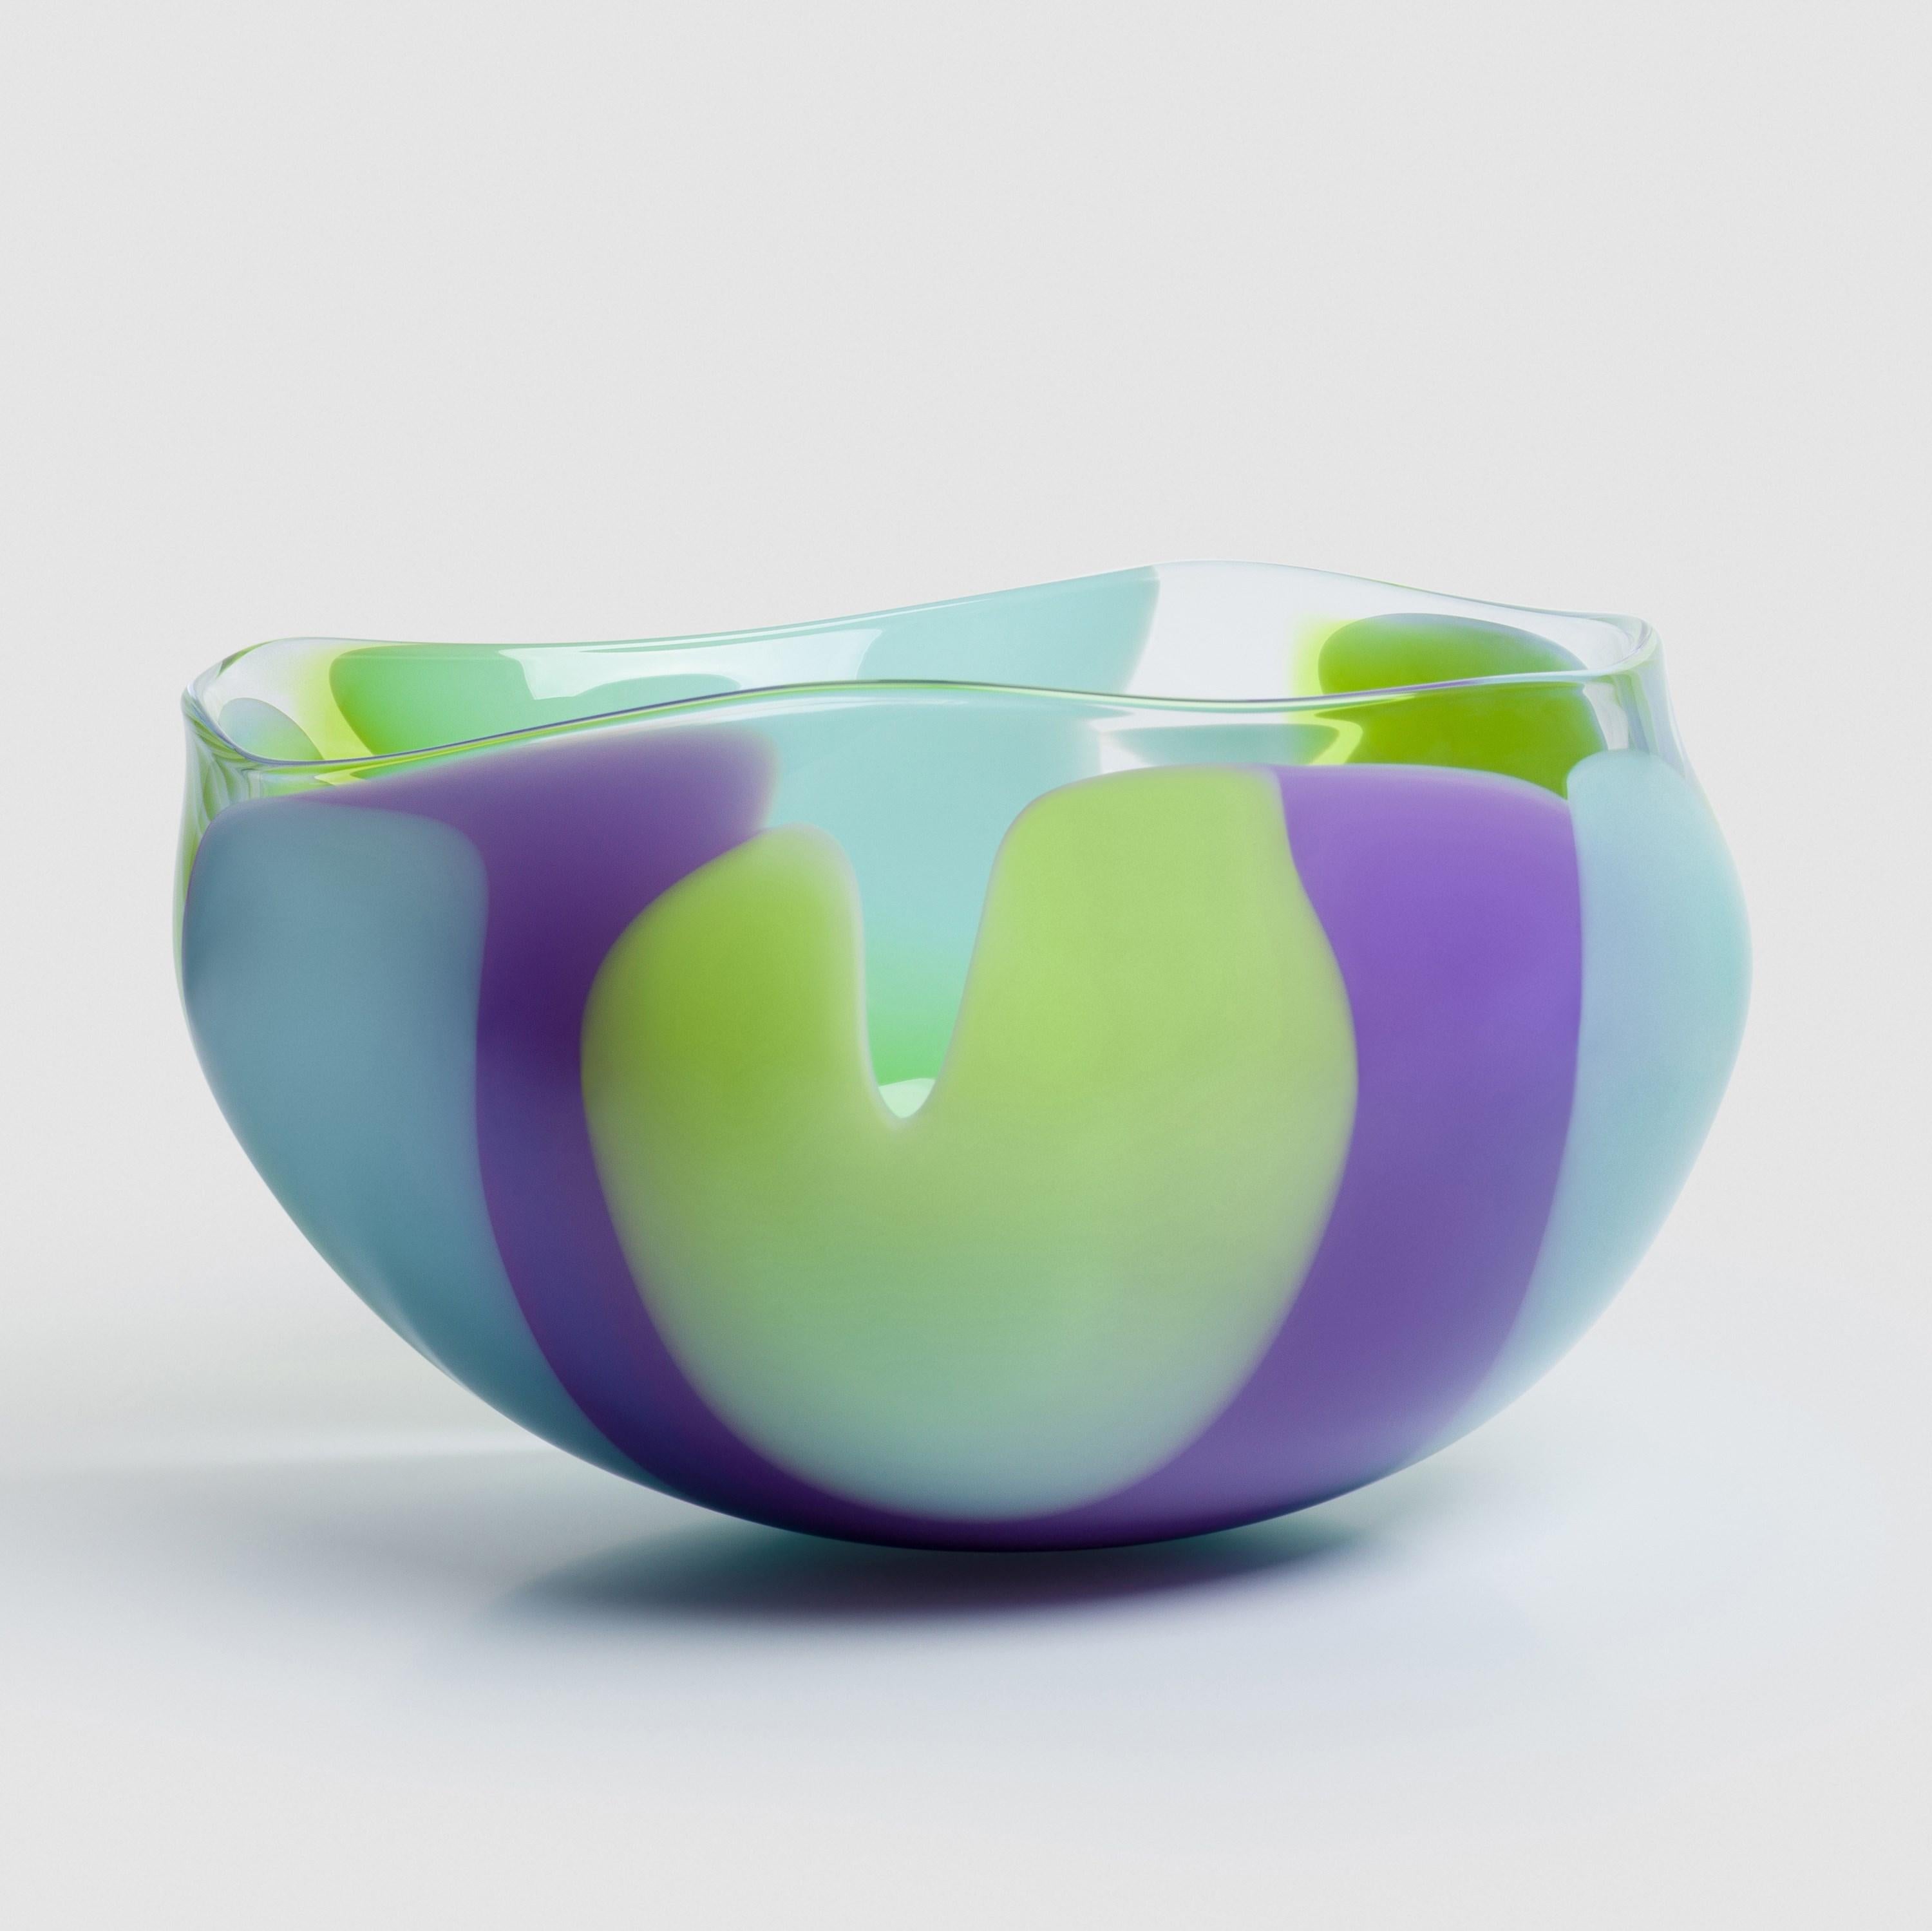 'Waves No 652' is a handblown glass bowl by the British artist, Neil Wilkin.

'Waves' is a collection of beautifully crafted, unique glass bowls and centrepieces by the British artist Neil Wilkin. Taking a painterly approach, Neil Wilkin merges his